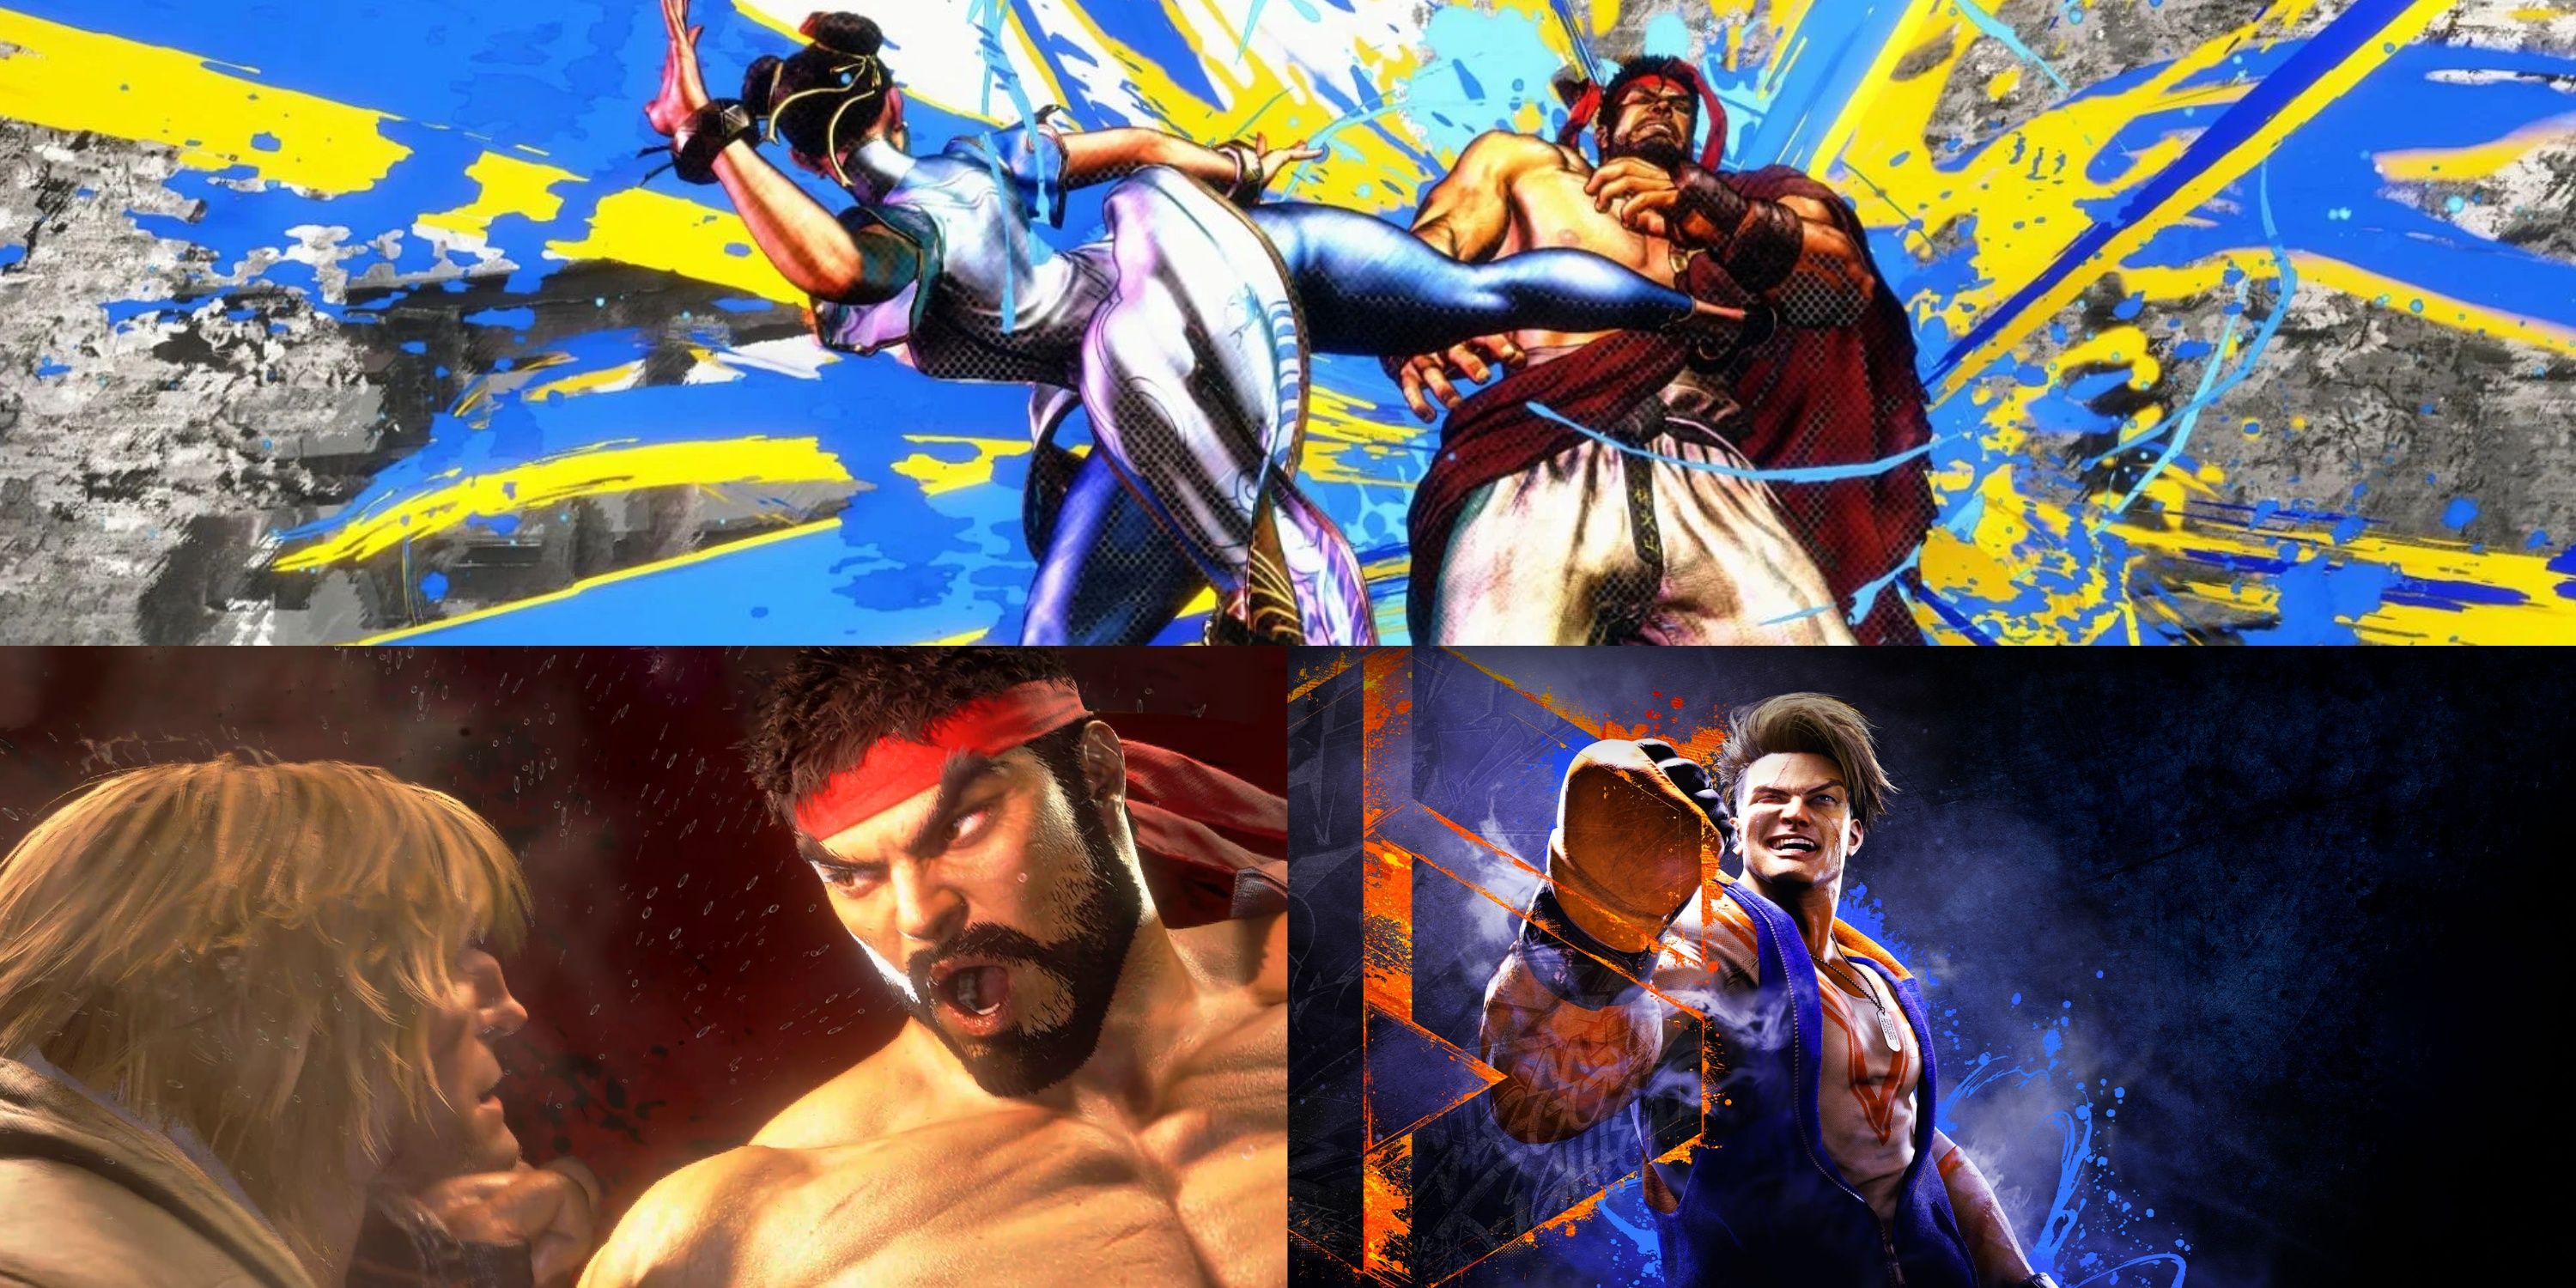 Street Fighter 6 Guide – The Best Character Combos Recommendations